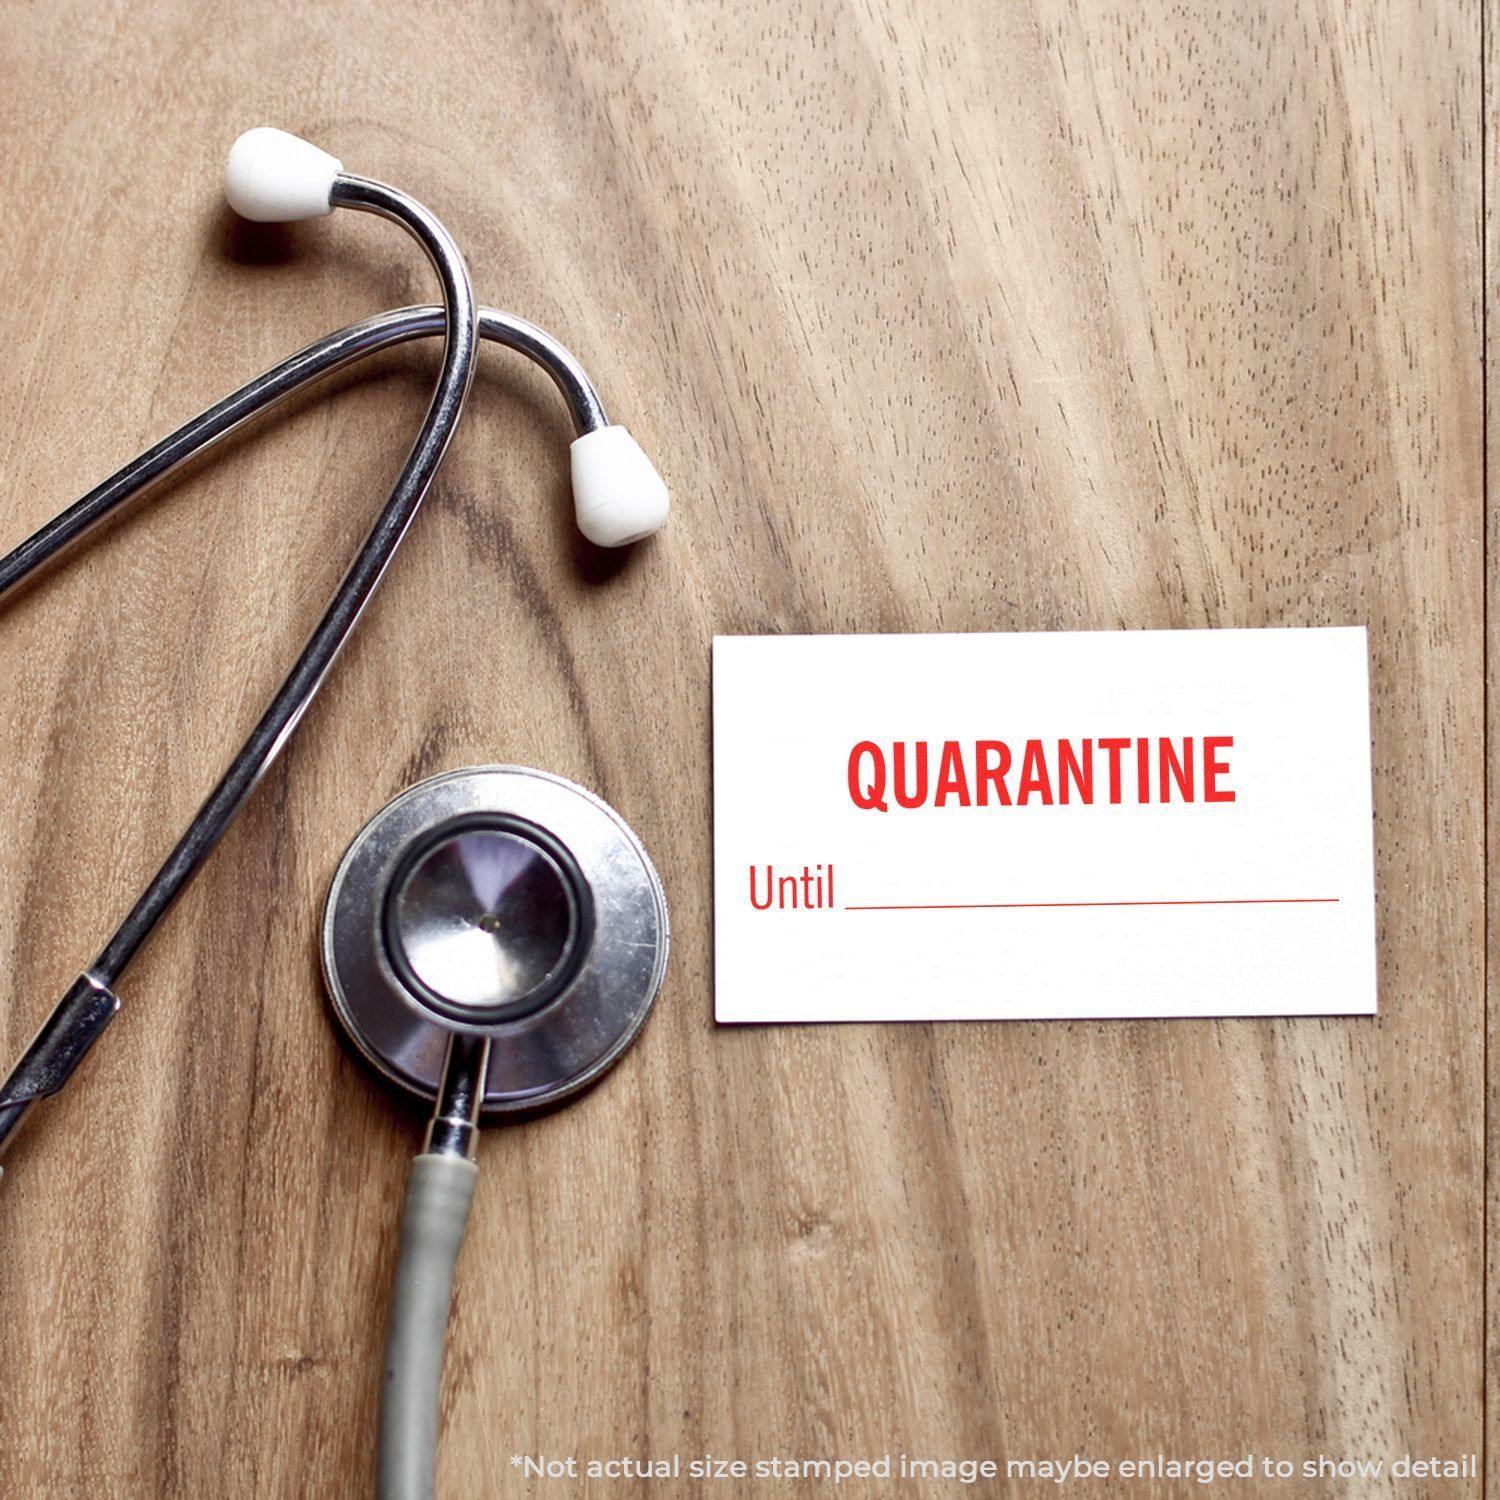 A stock office rubber stamp with a stamped image showing how the text "QUARANTINE Until" in a large font with a line is displayed after stamping.